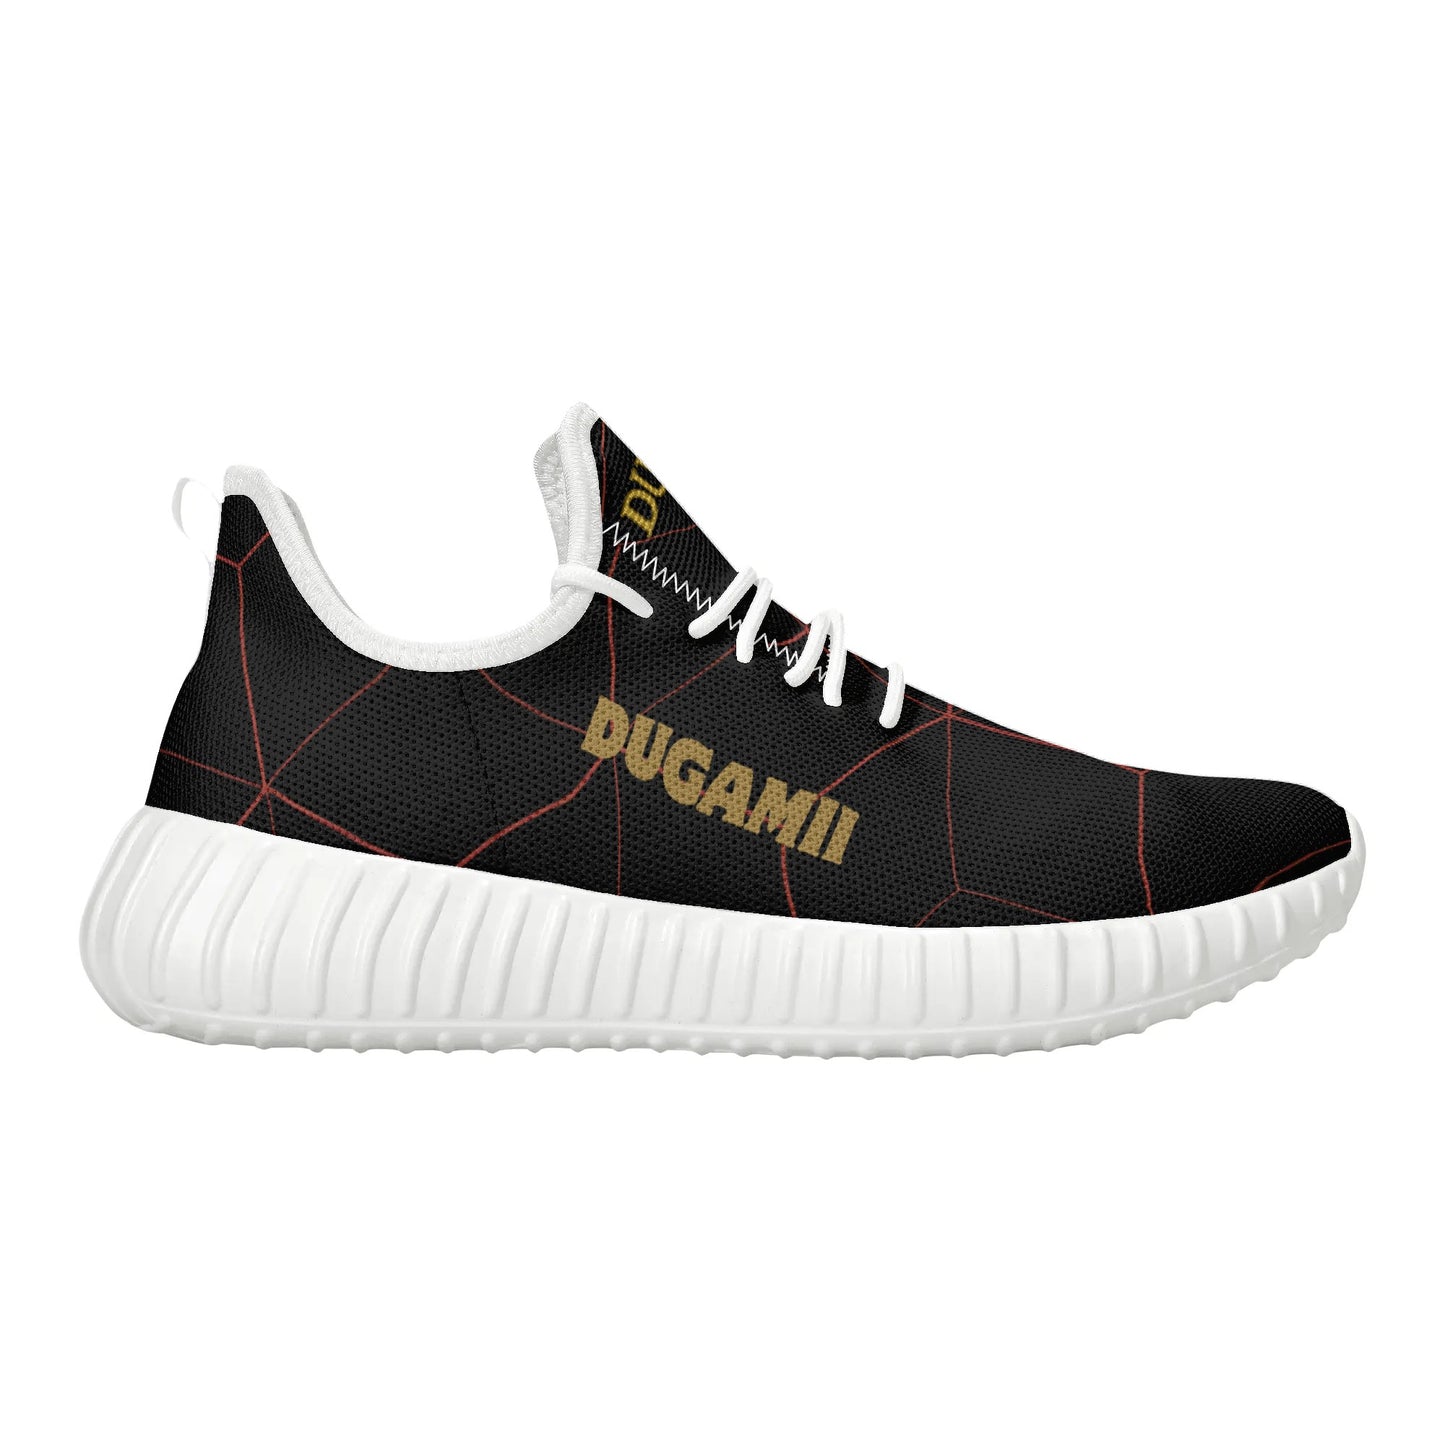 Mens DuGamii Black and Red Mesh Knit Sneakers